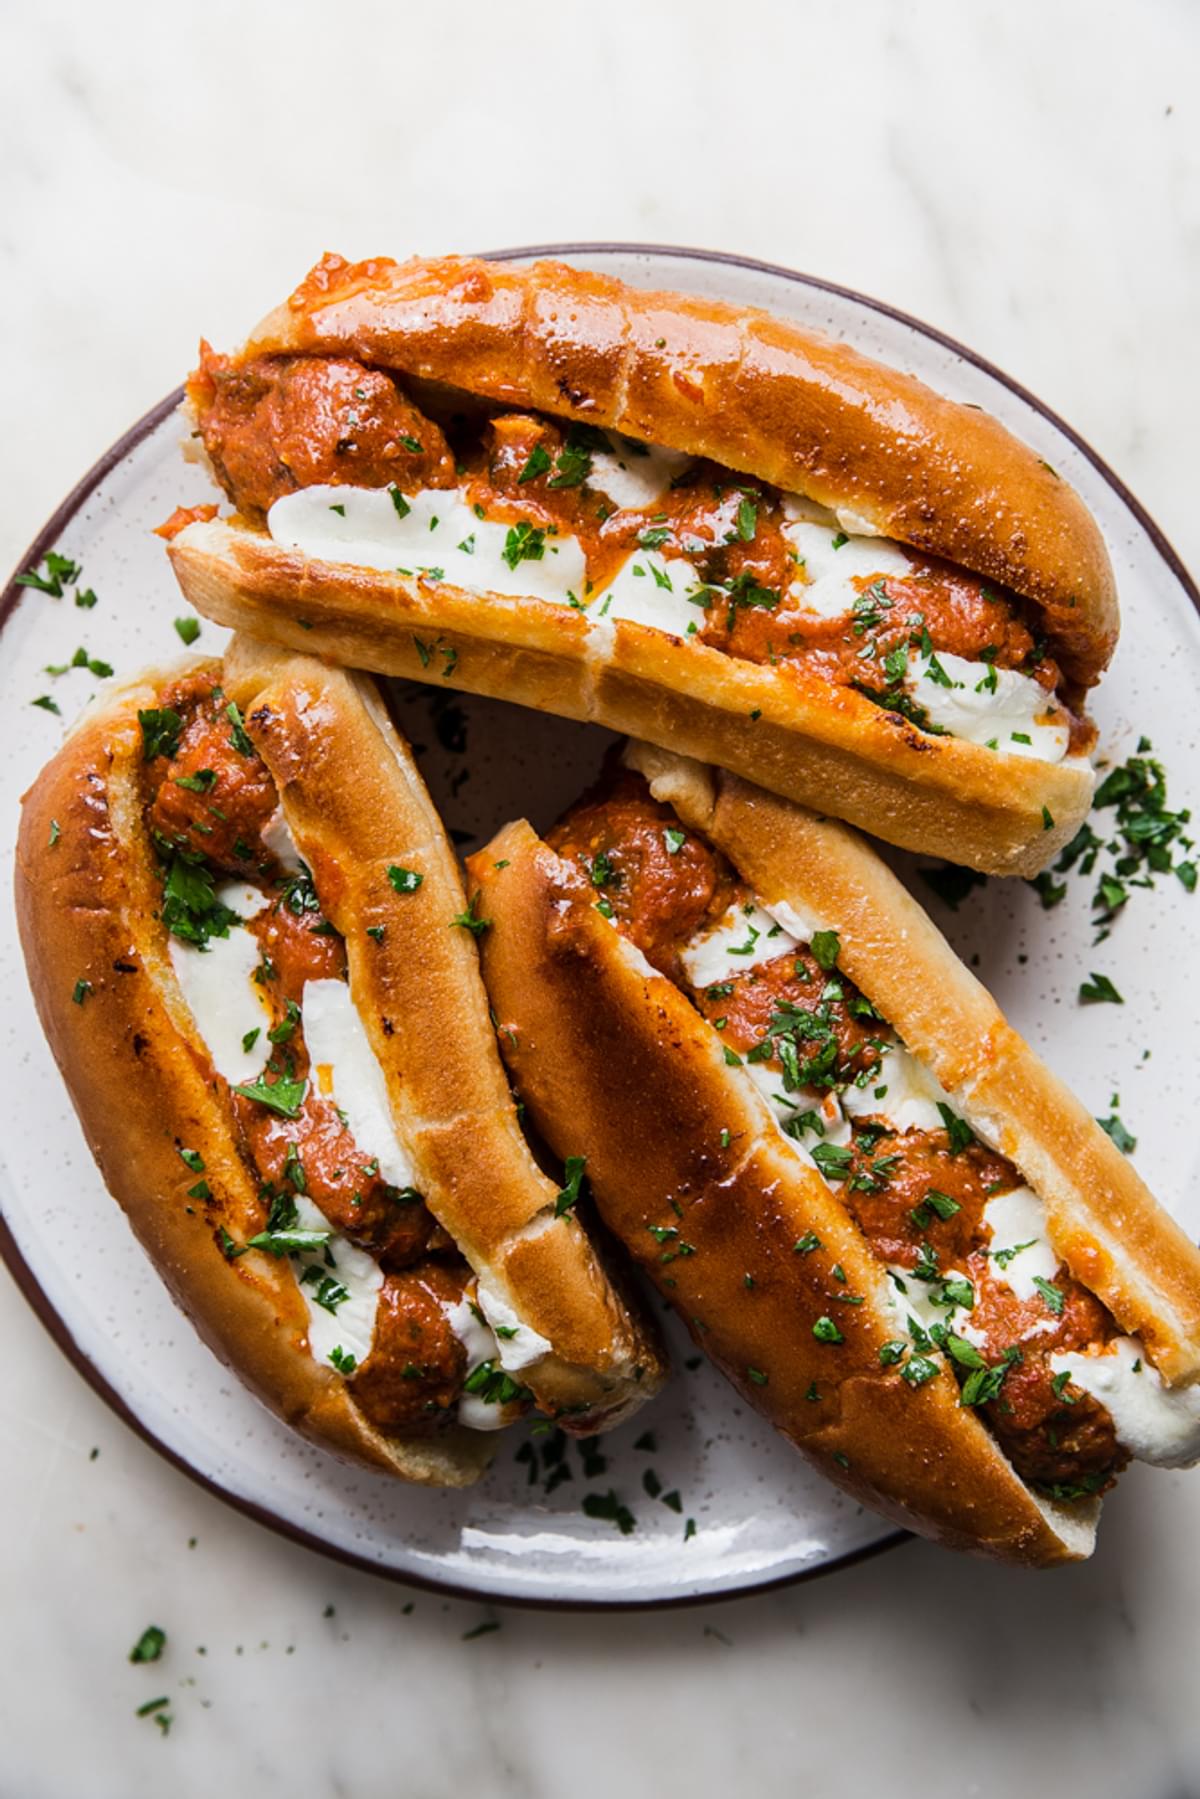 meatball sub sandwich with mozzarella and parsley on a plate